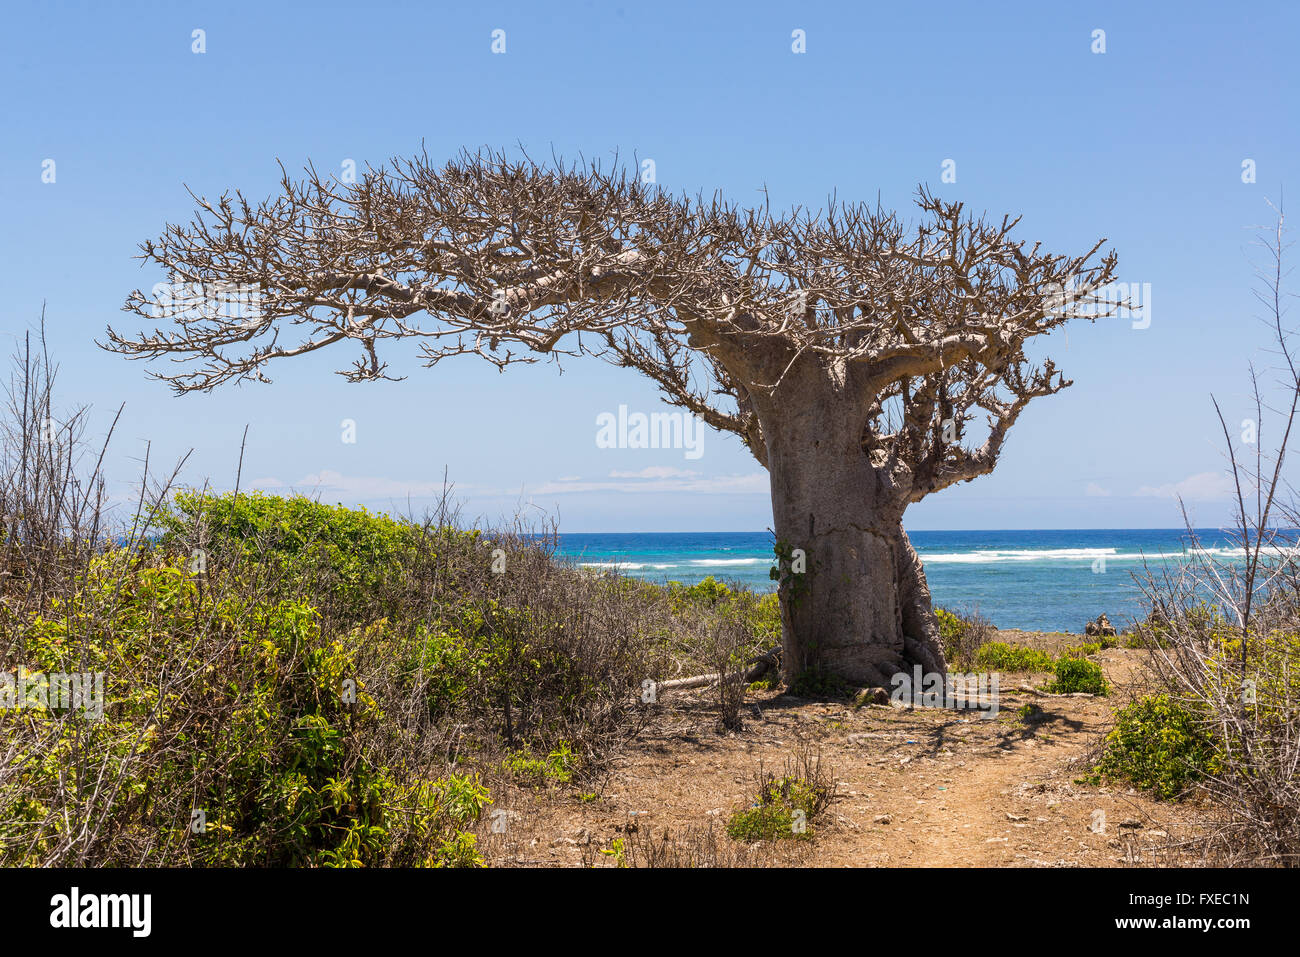 Big baobab tree growing surrounded by bushes and sea in the background Stock Photo